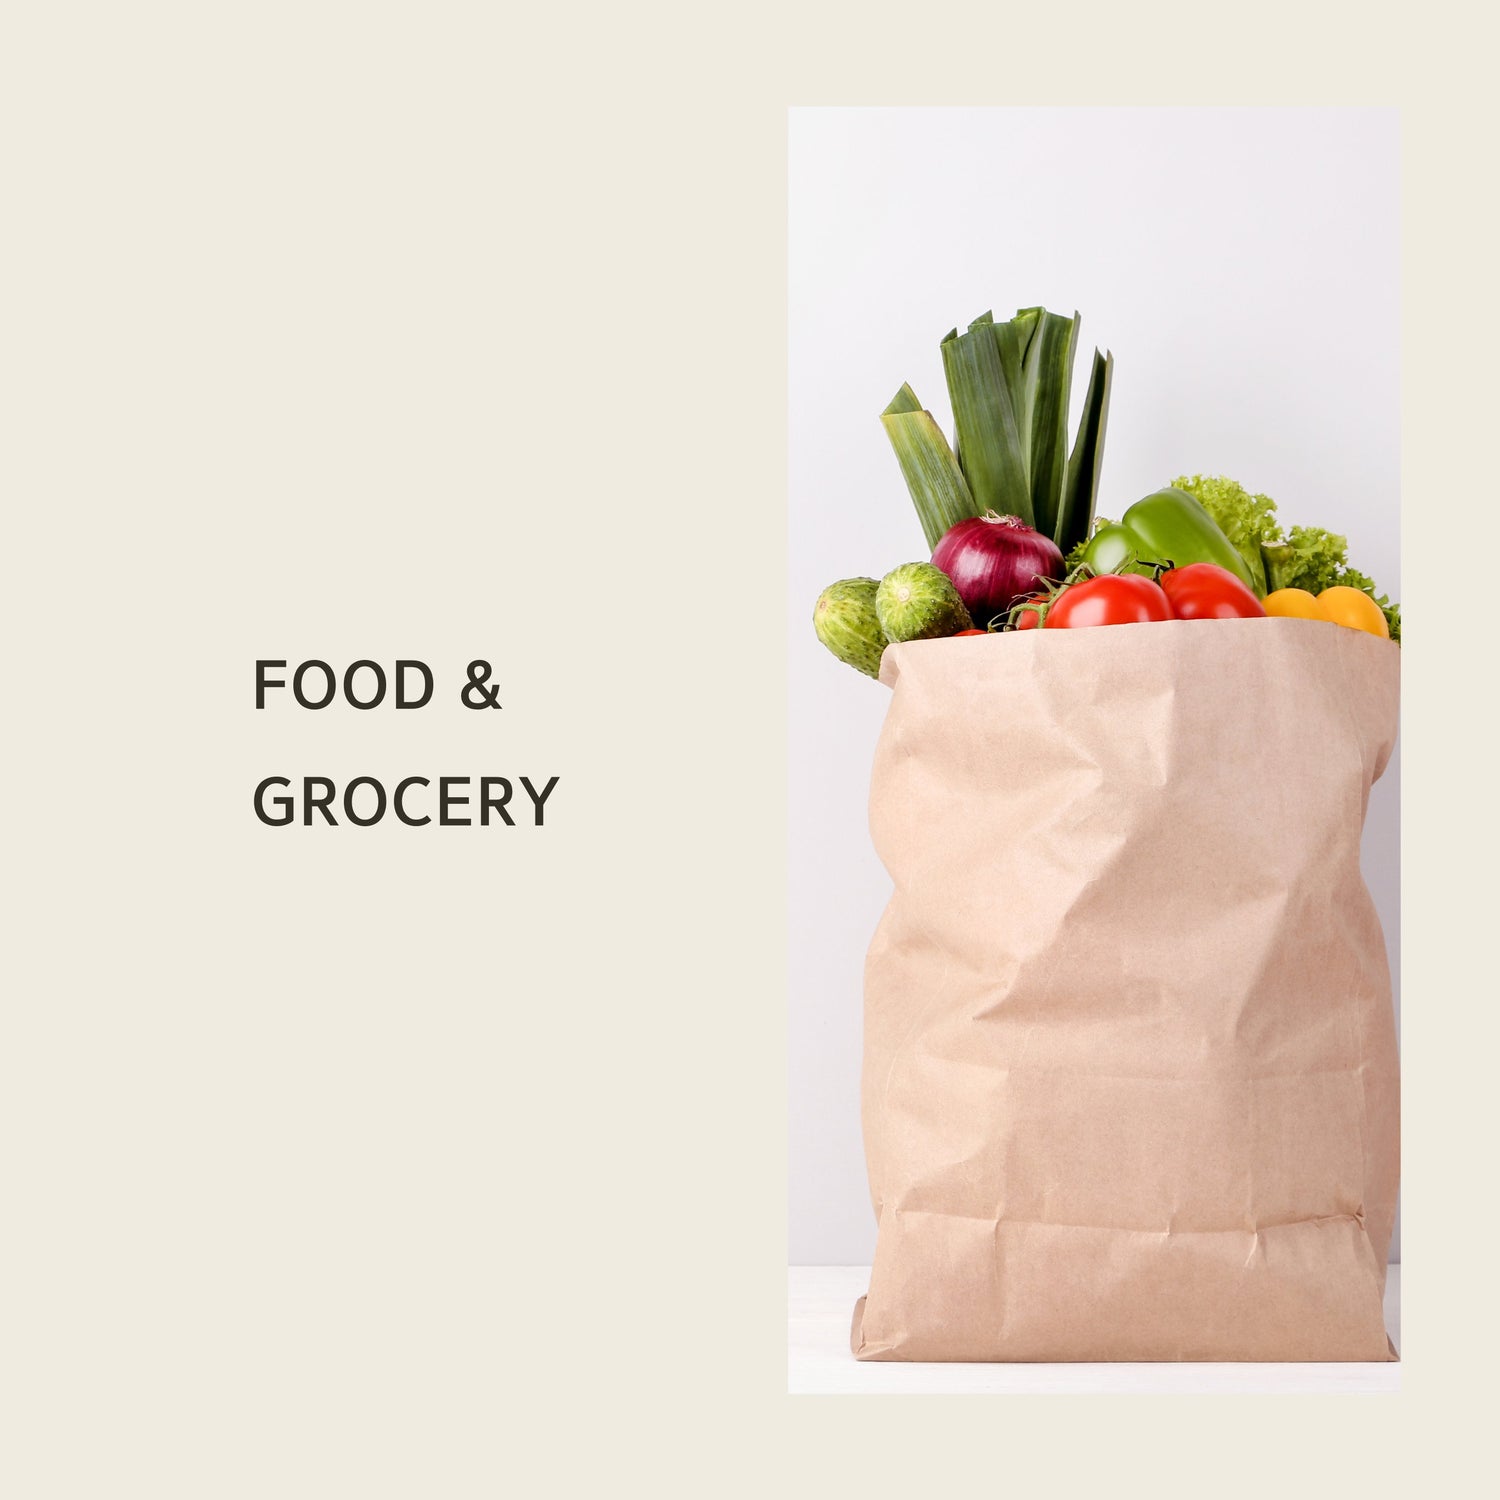 FOOD & GROCERY